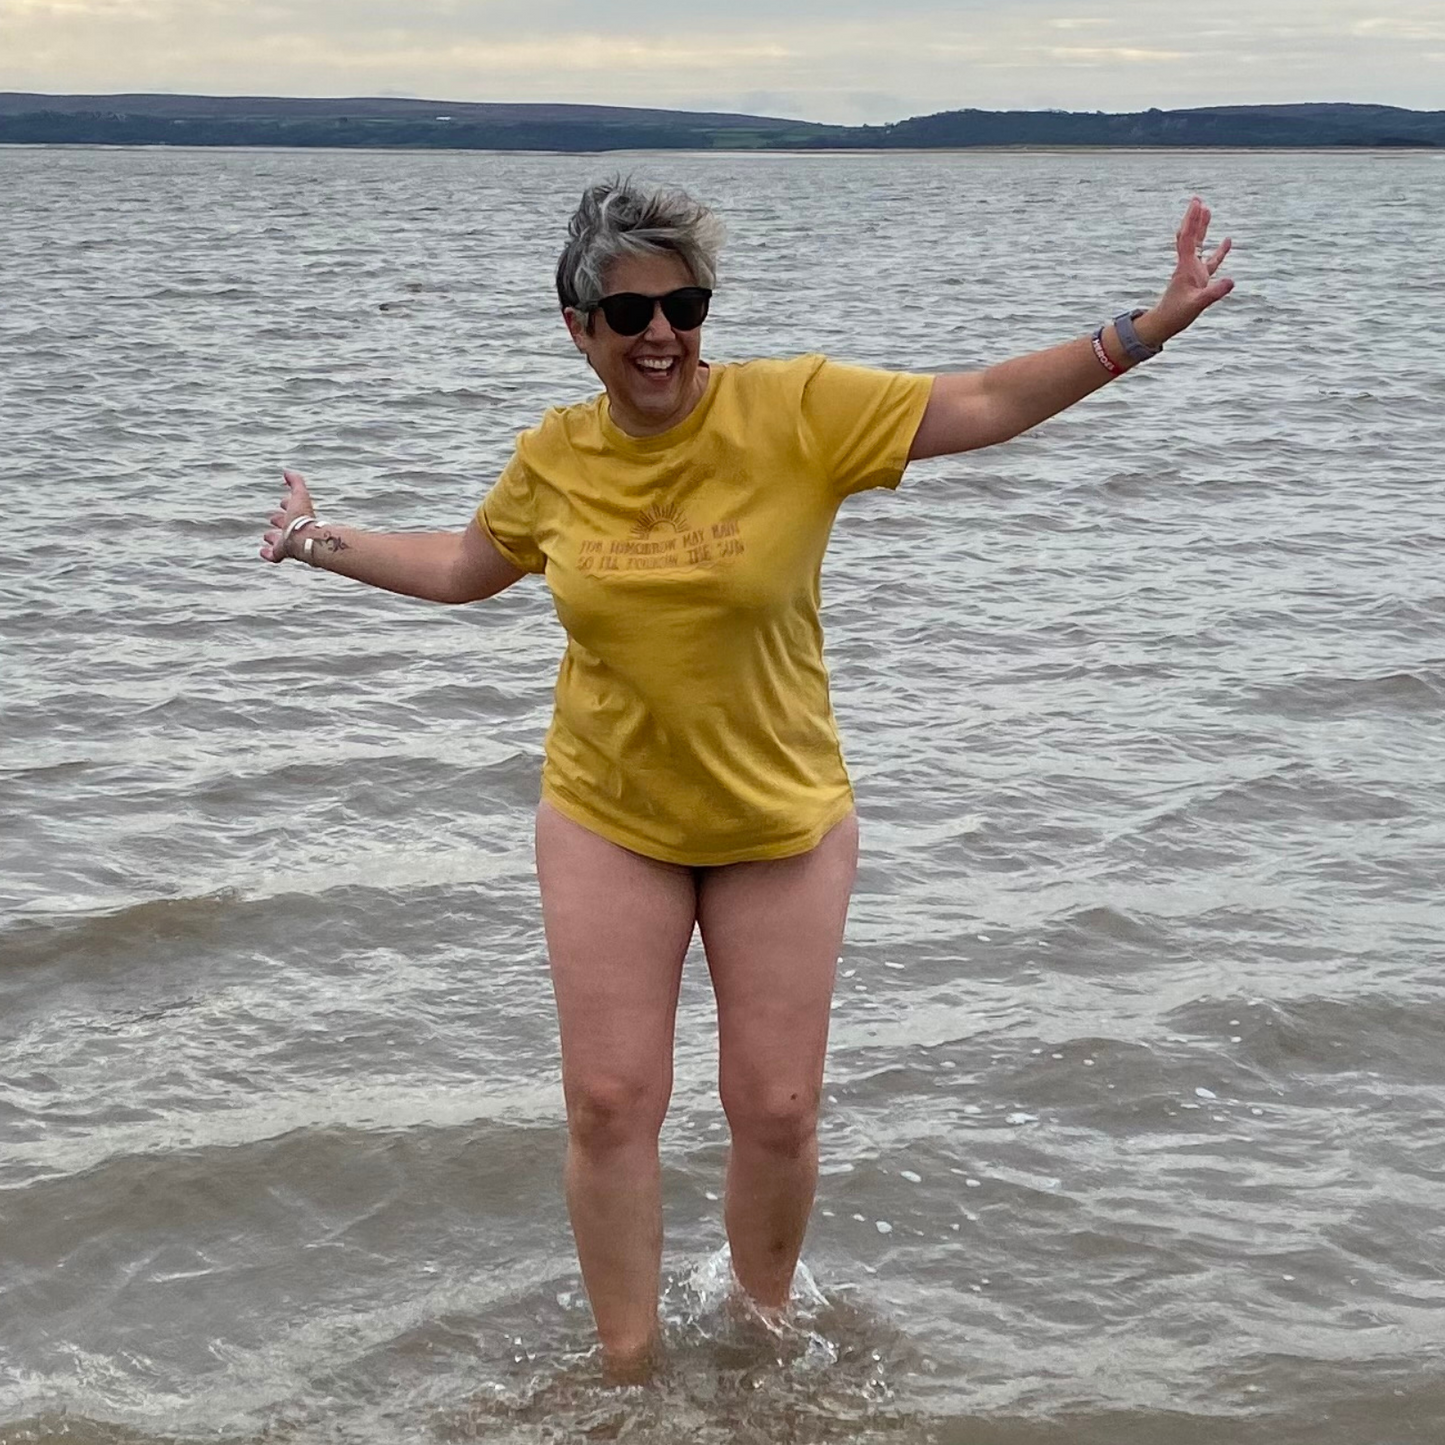 A woman dancing in the sea wearing a vintage gold t-shirt and sunglasses.